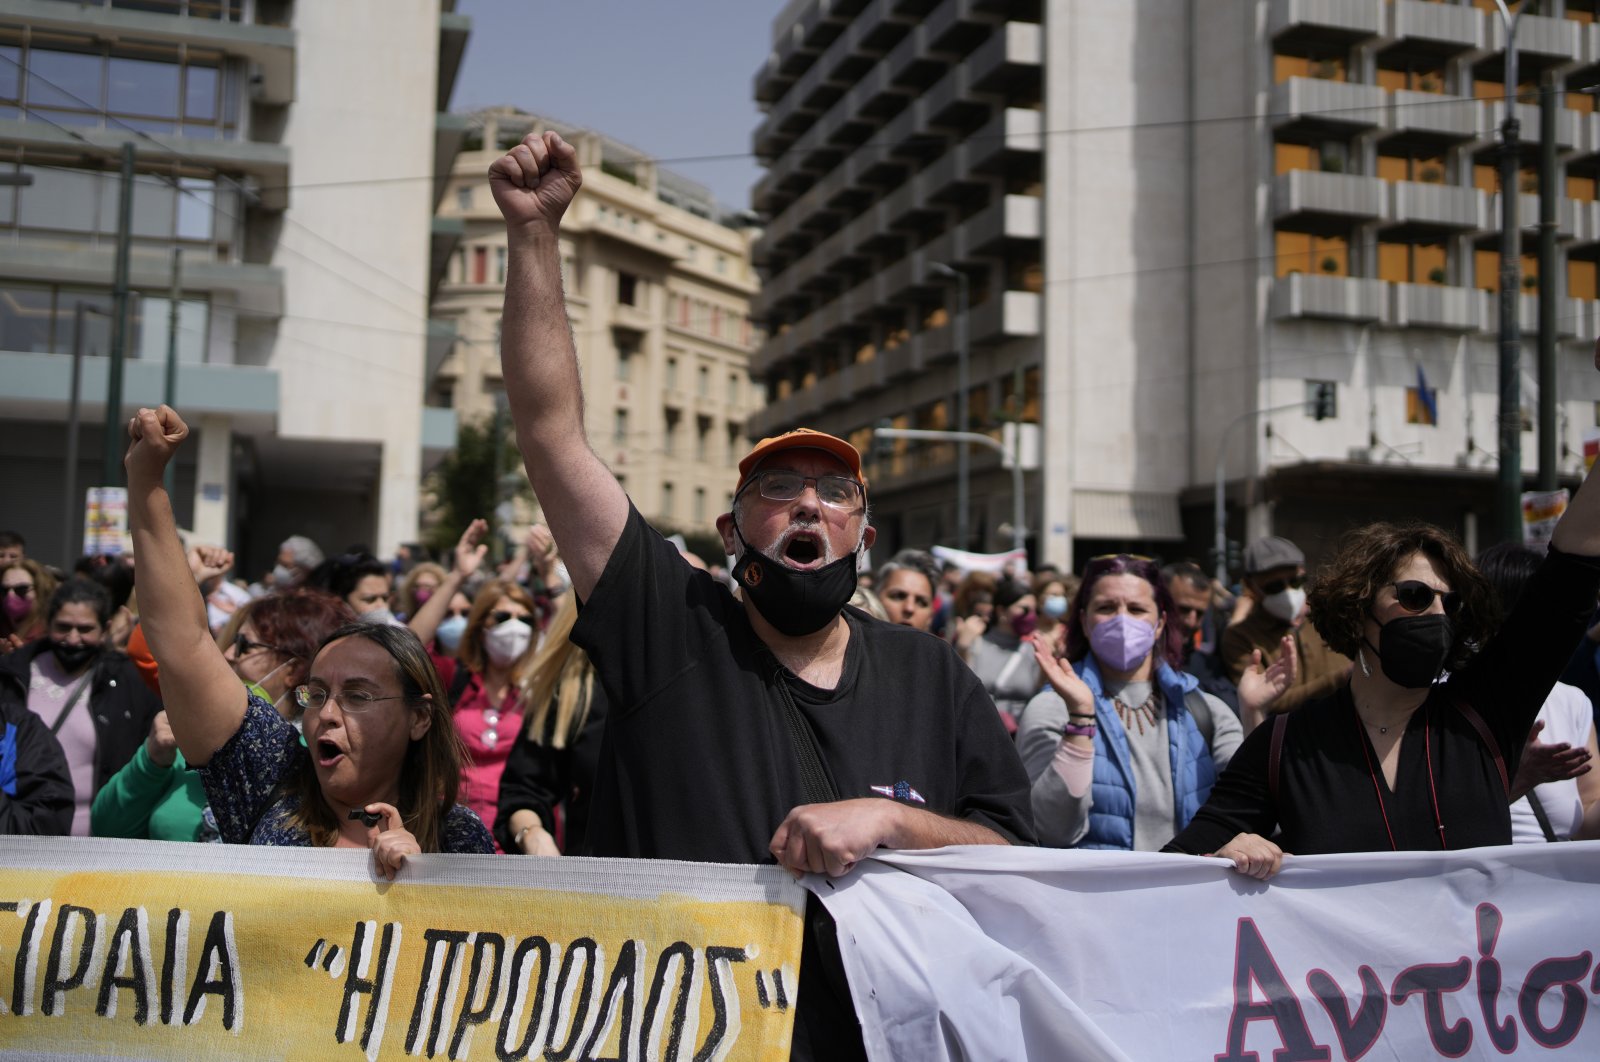 Demonstrators shout slogans as they march during a 24-hour nationwide strike in central Athens, Greece, April 6, 2022. (AP Photo)